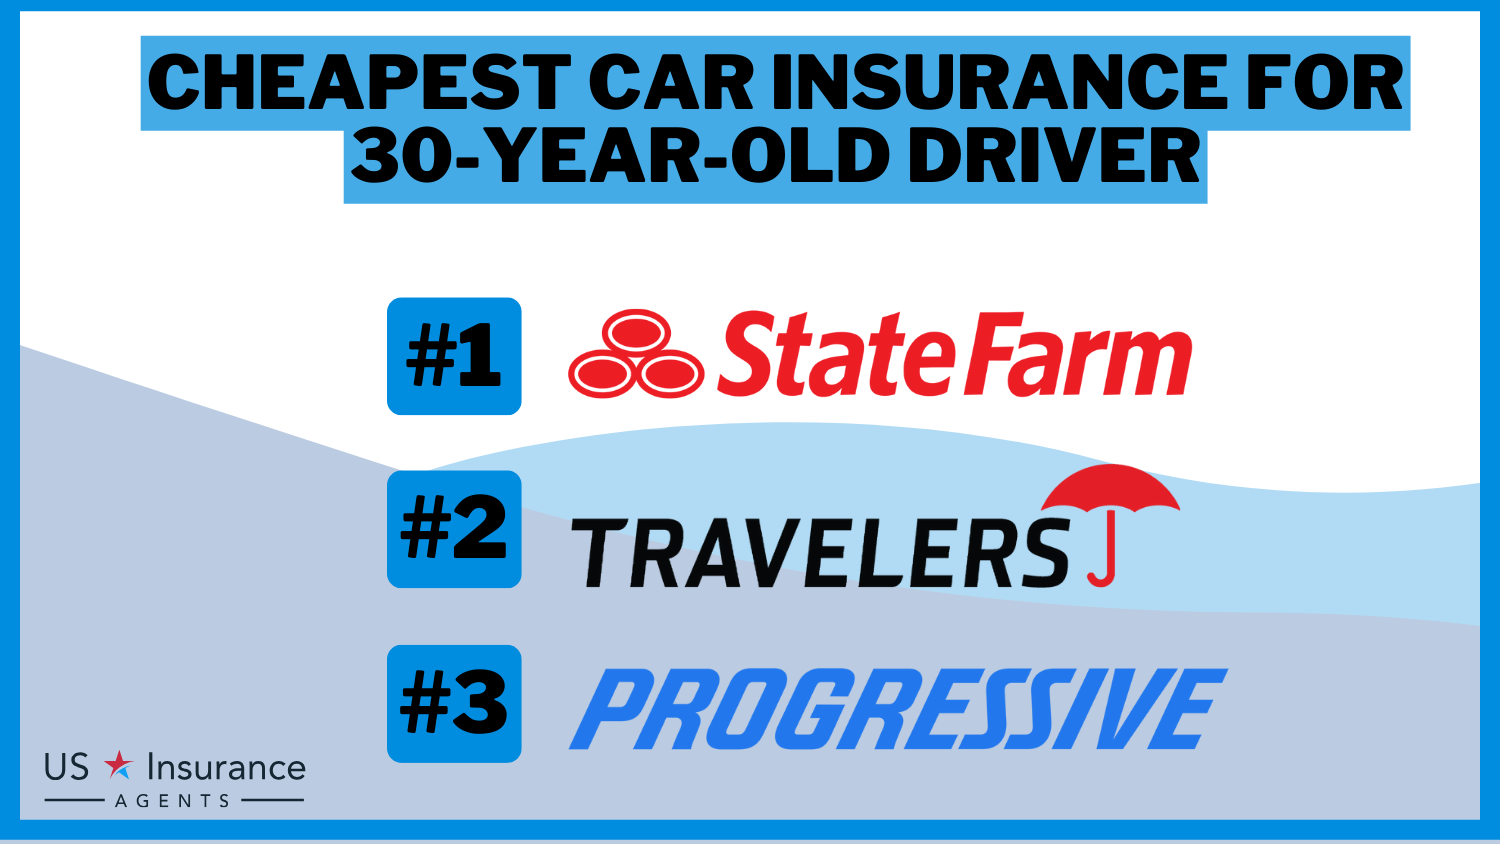 Cheap Car Insurance for 30-Year-Old Drivers: State Farm, Travelers, and Progressive